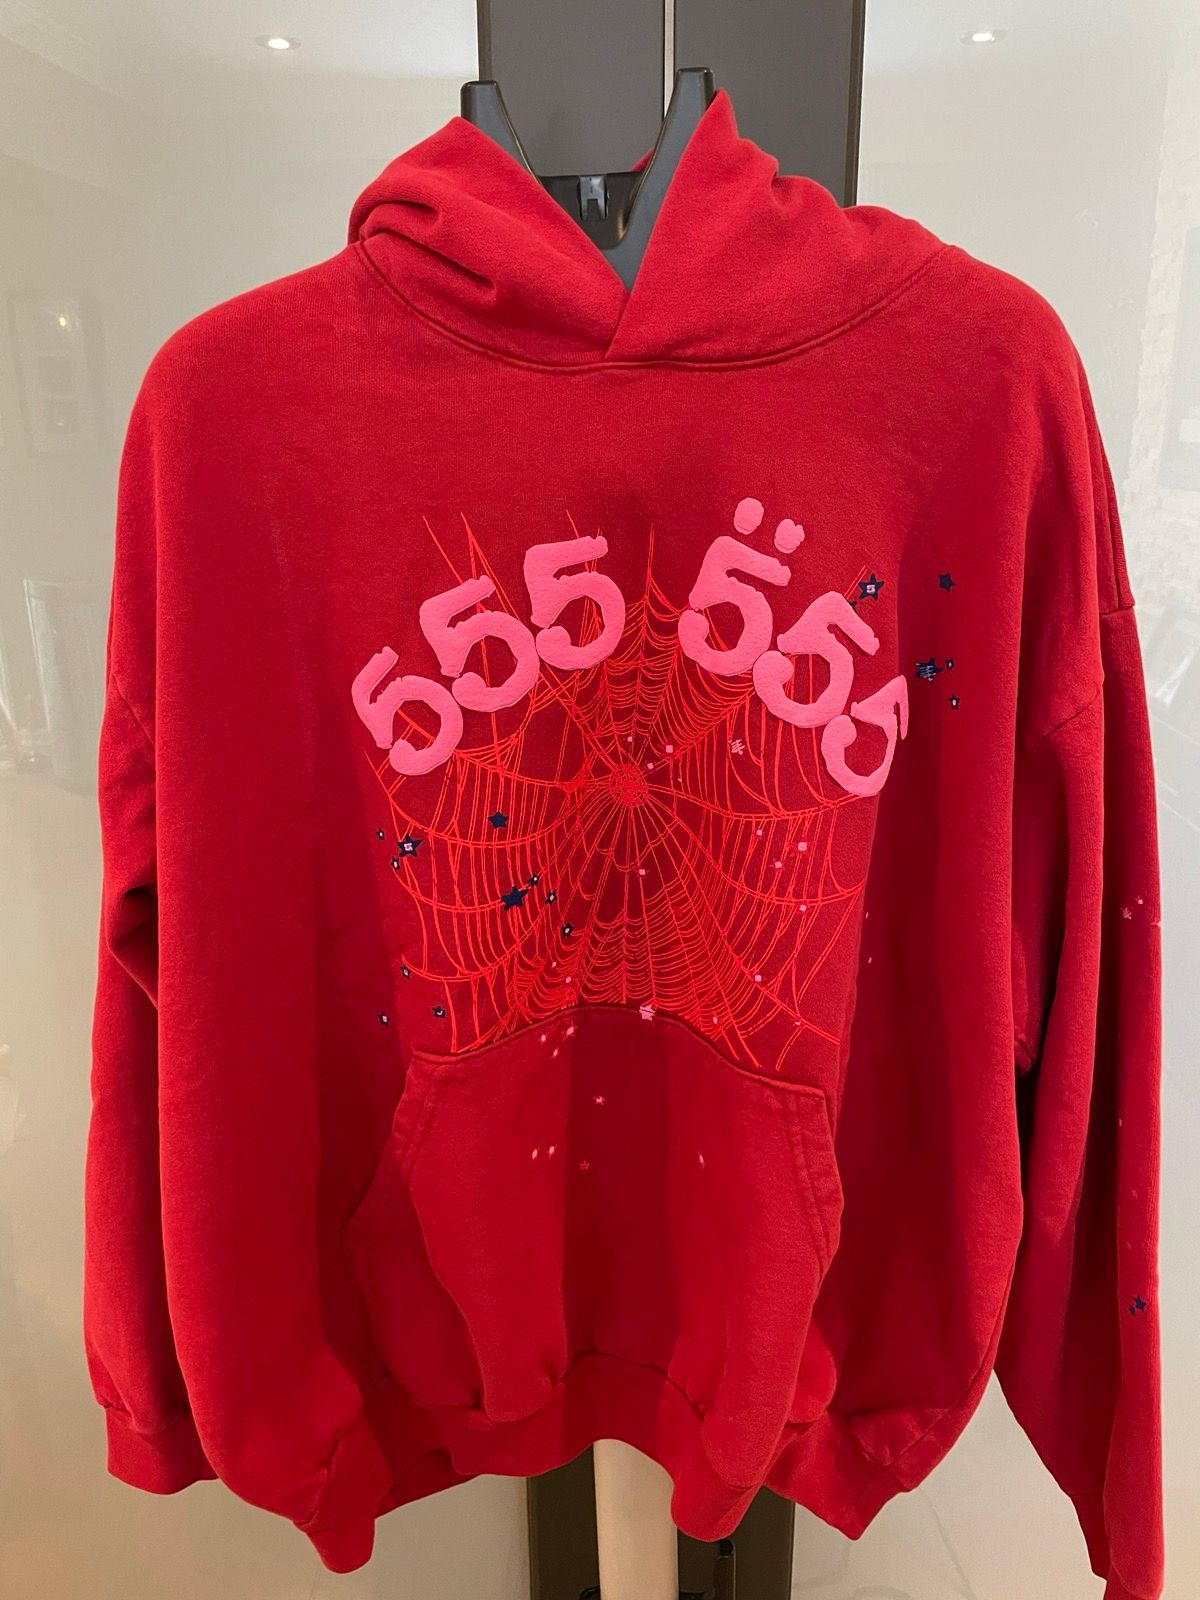 Pre-owned Spider Worldwide Sp5der Worldwide X Young Thug Red Angelnumber 555 Hoodie